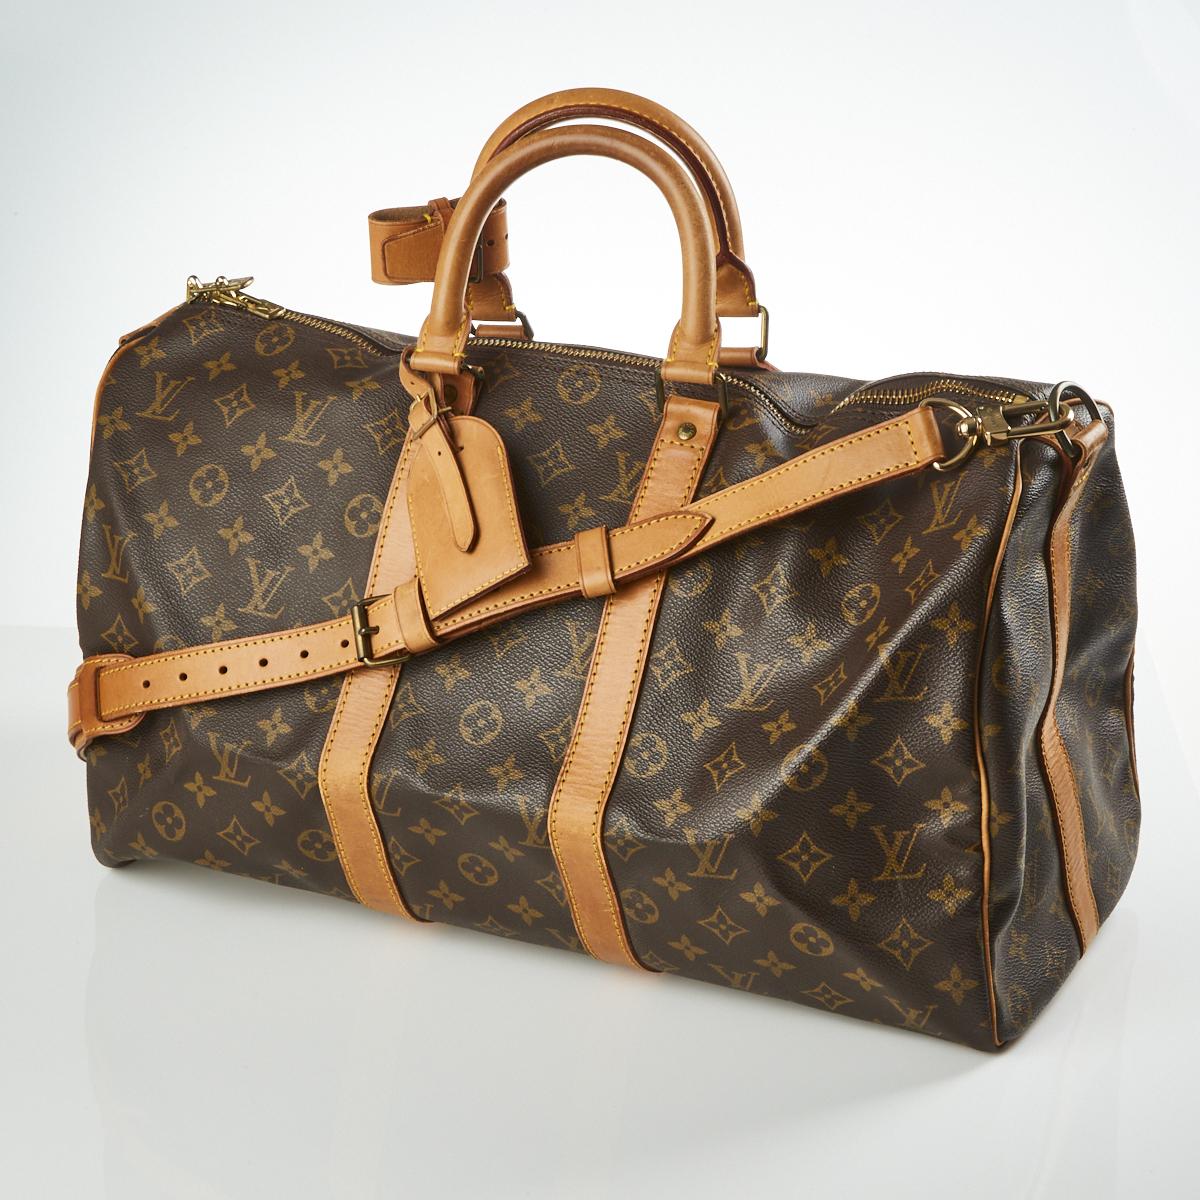 Sold at Auction: Louis Vuitton, Louis Vuitton Keepall Bandouliere